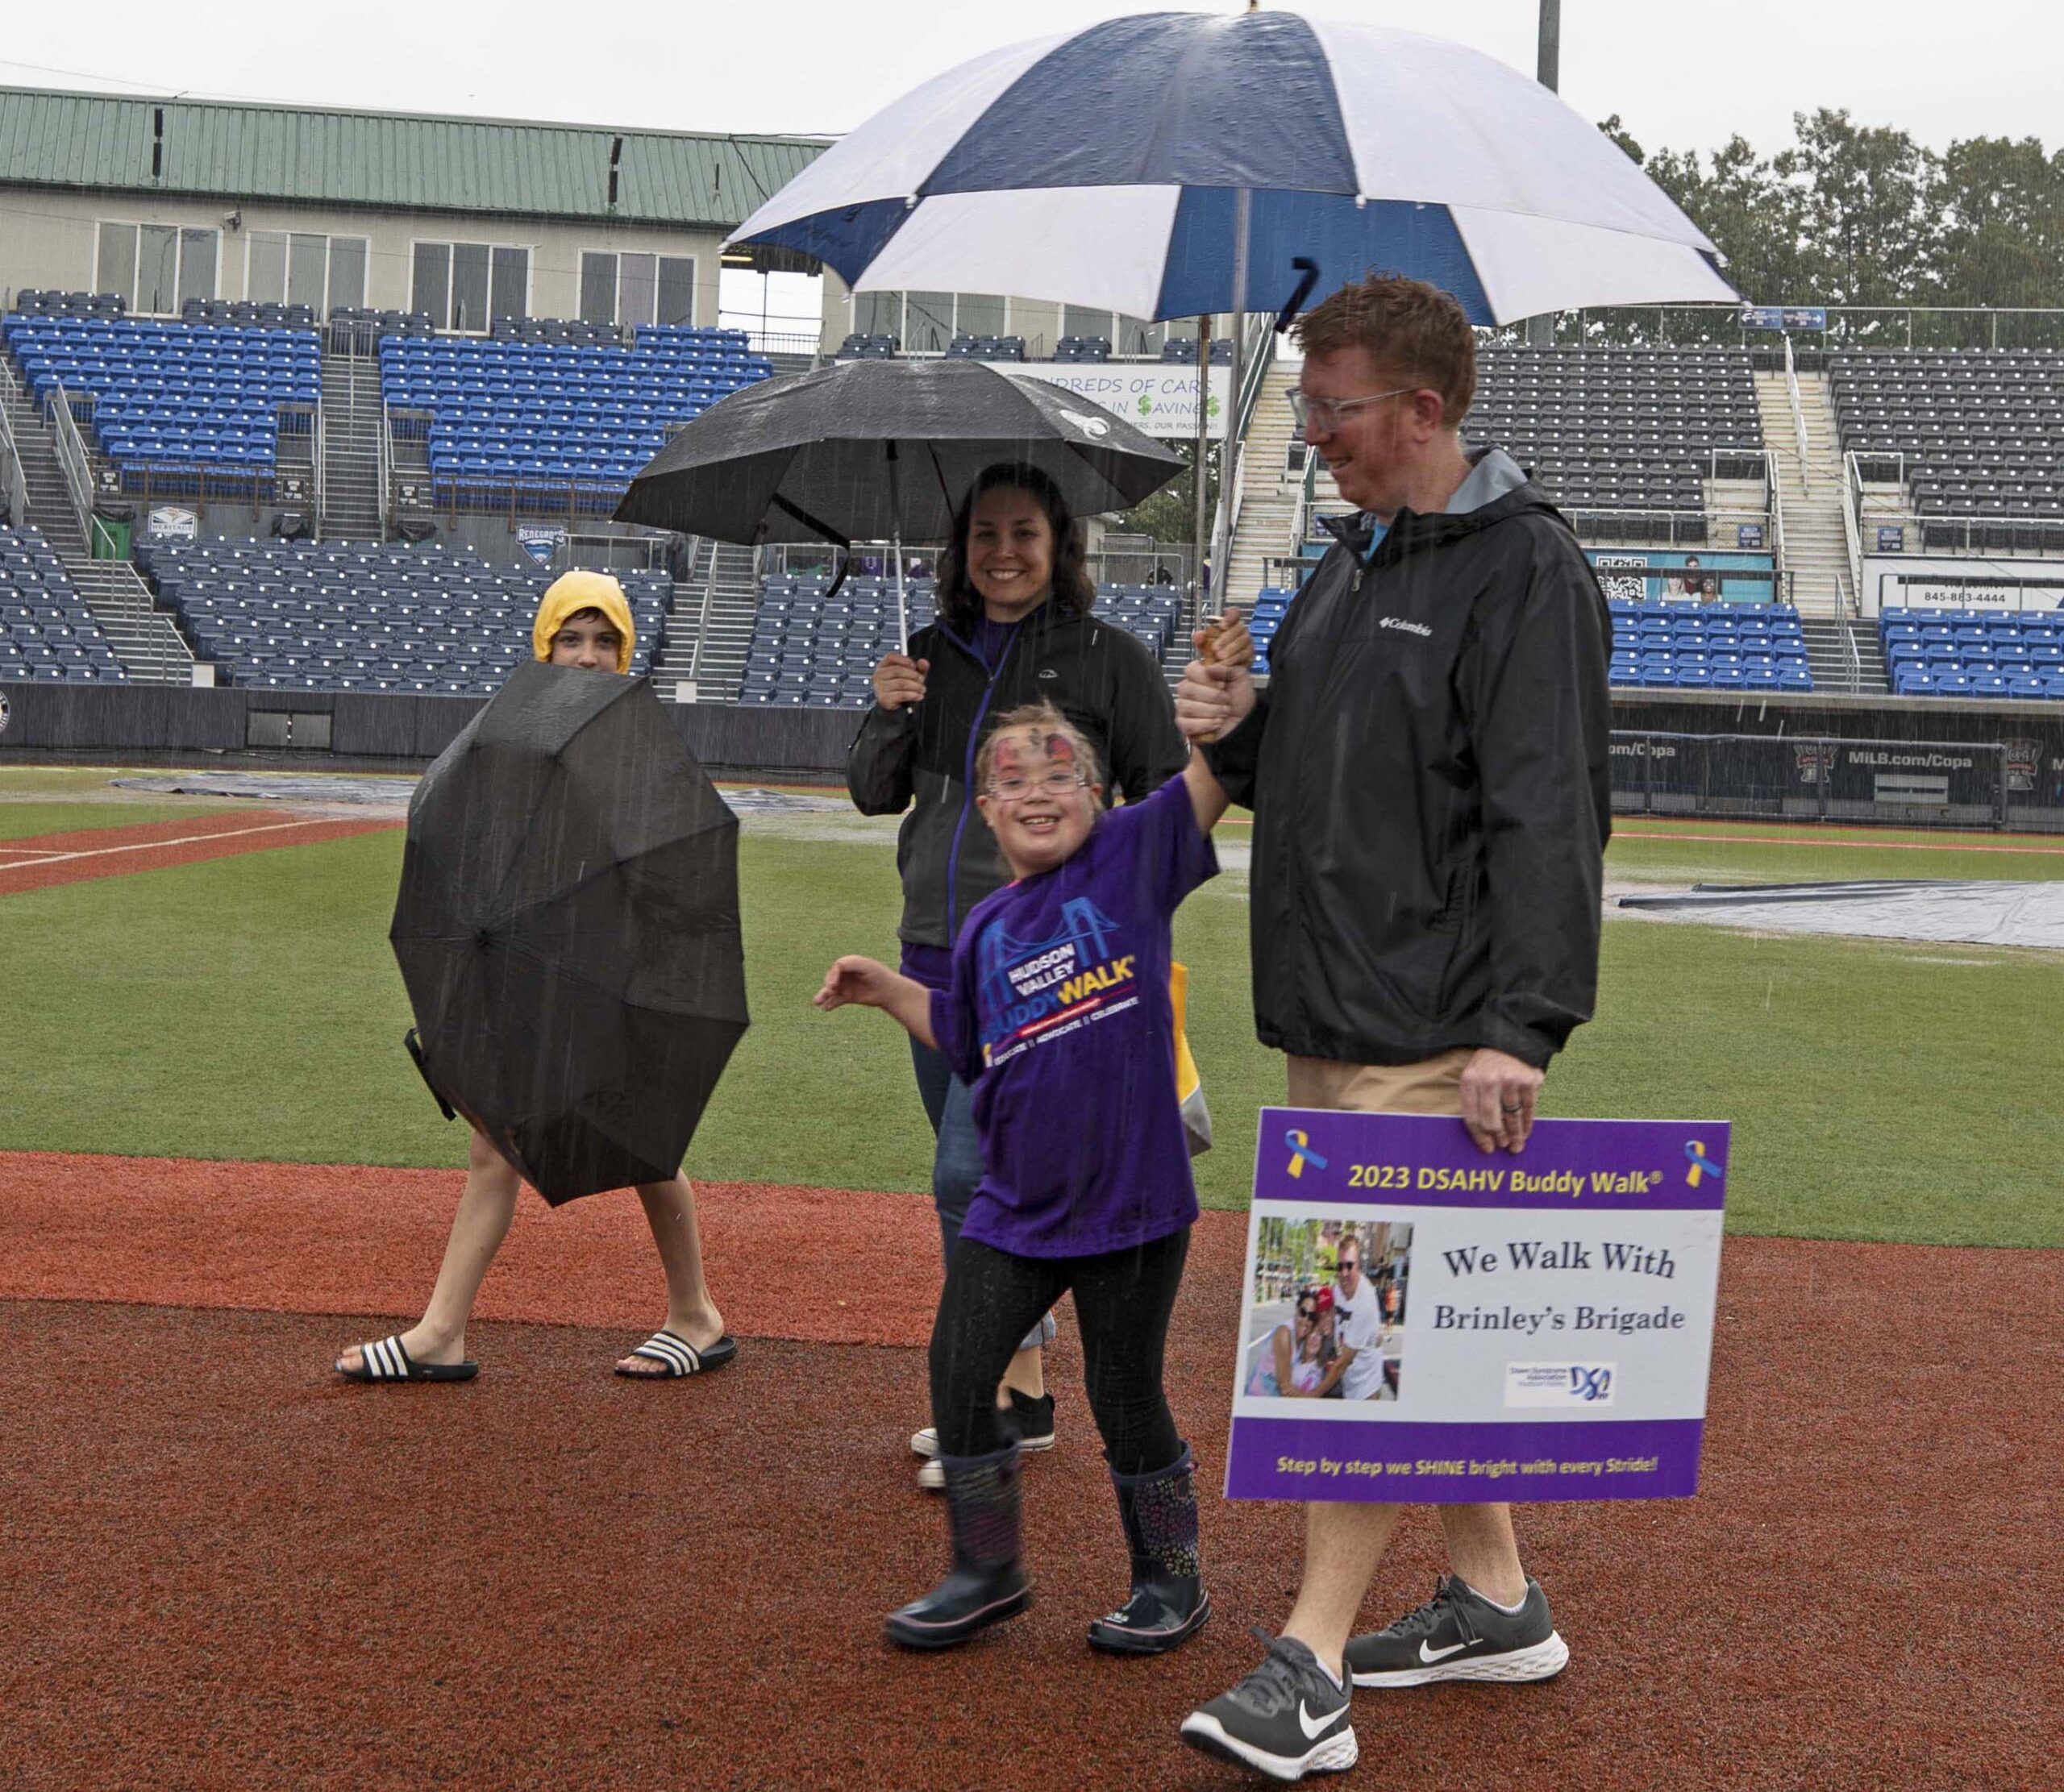 We walk rain or shine! Go Brinley’s Brigade! A family of 4 walks the baseline at Heritage Financial Park in support of Brinley’s Brigade! Down Syndrome Association of the Hudson Valley’s annual Buddy Walk at Heritage Financial Park on October 7, 2023